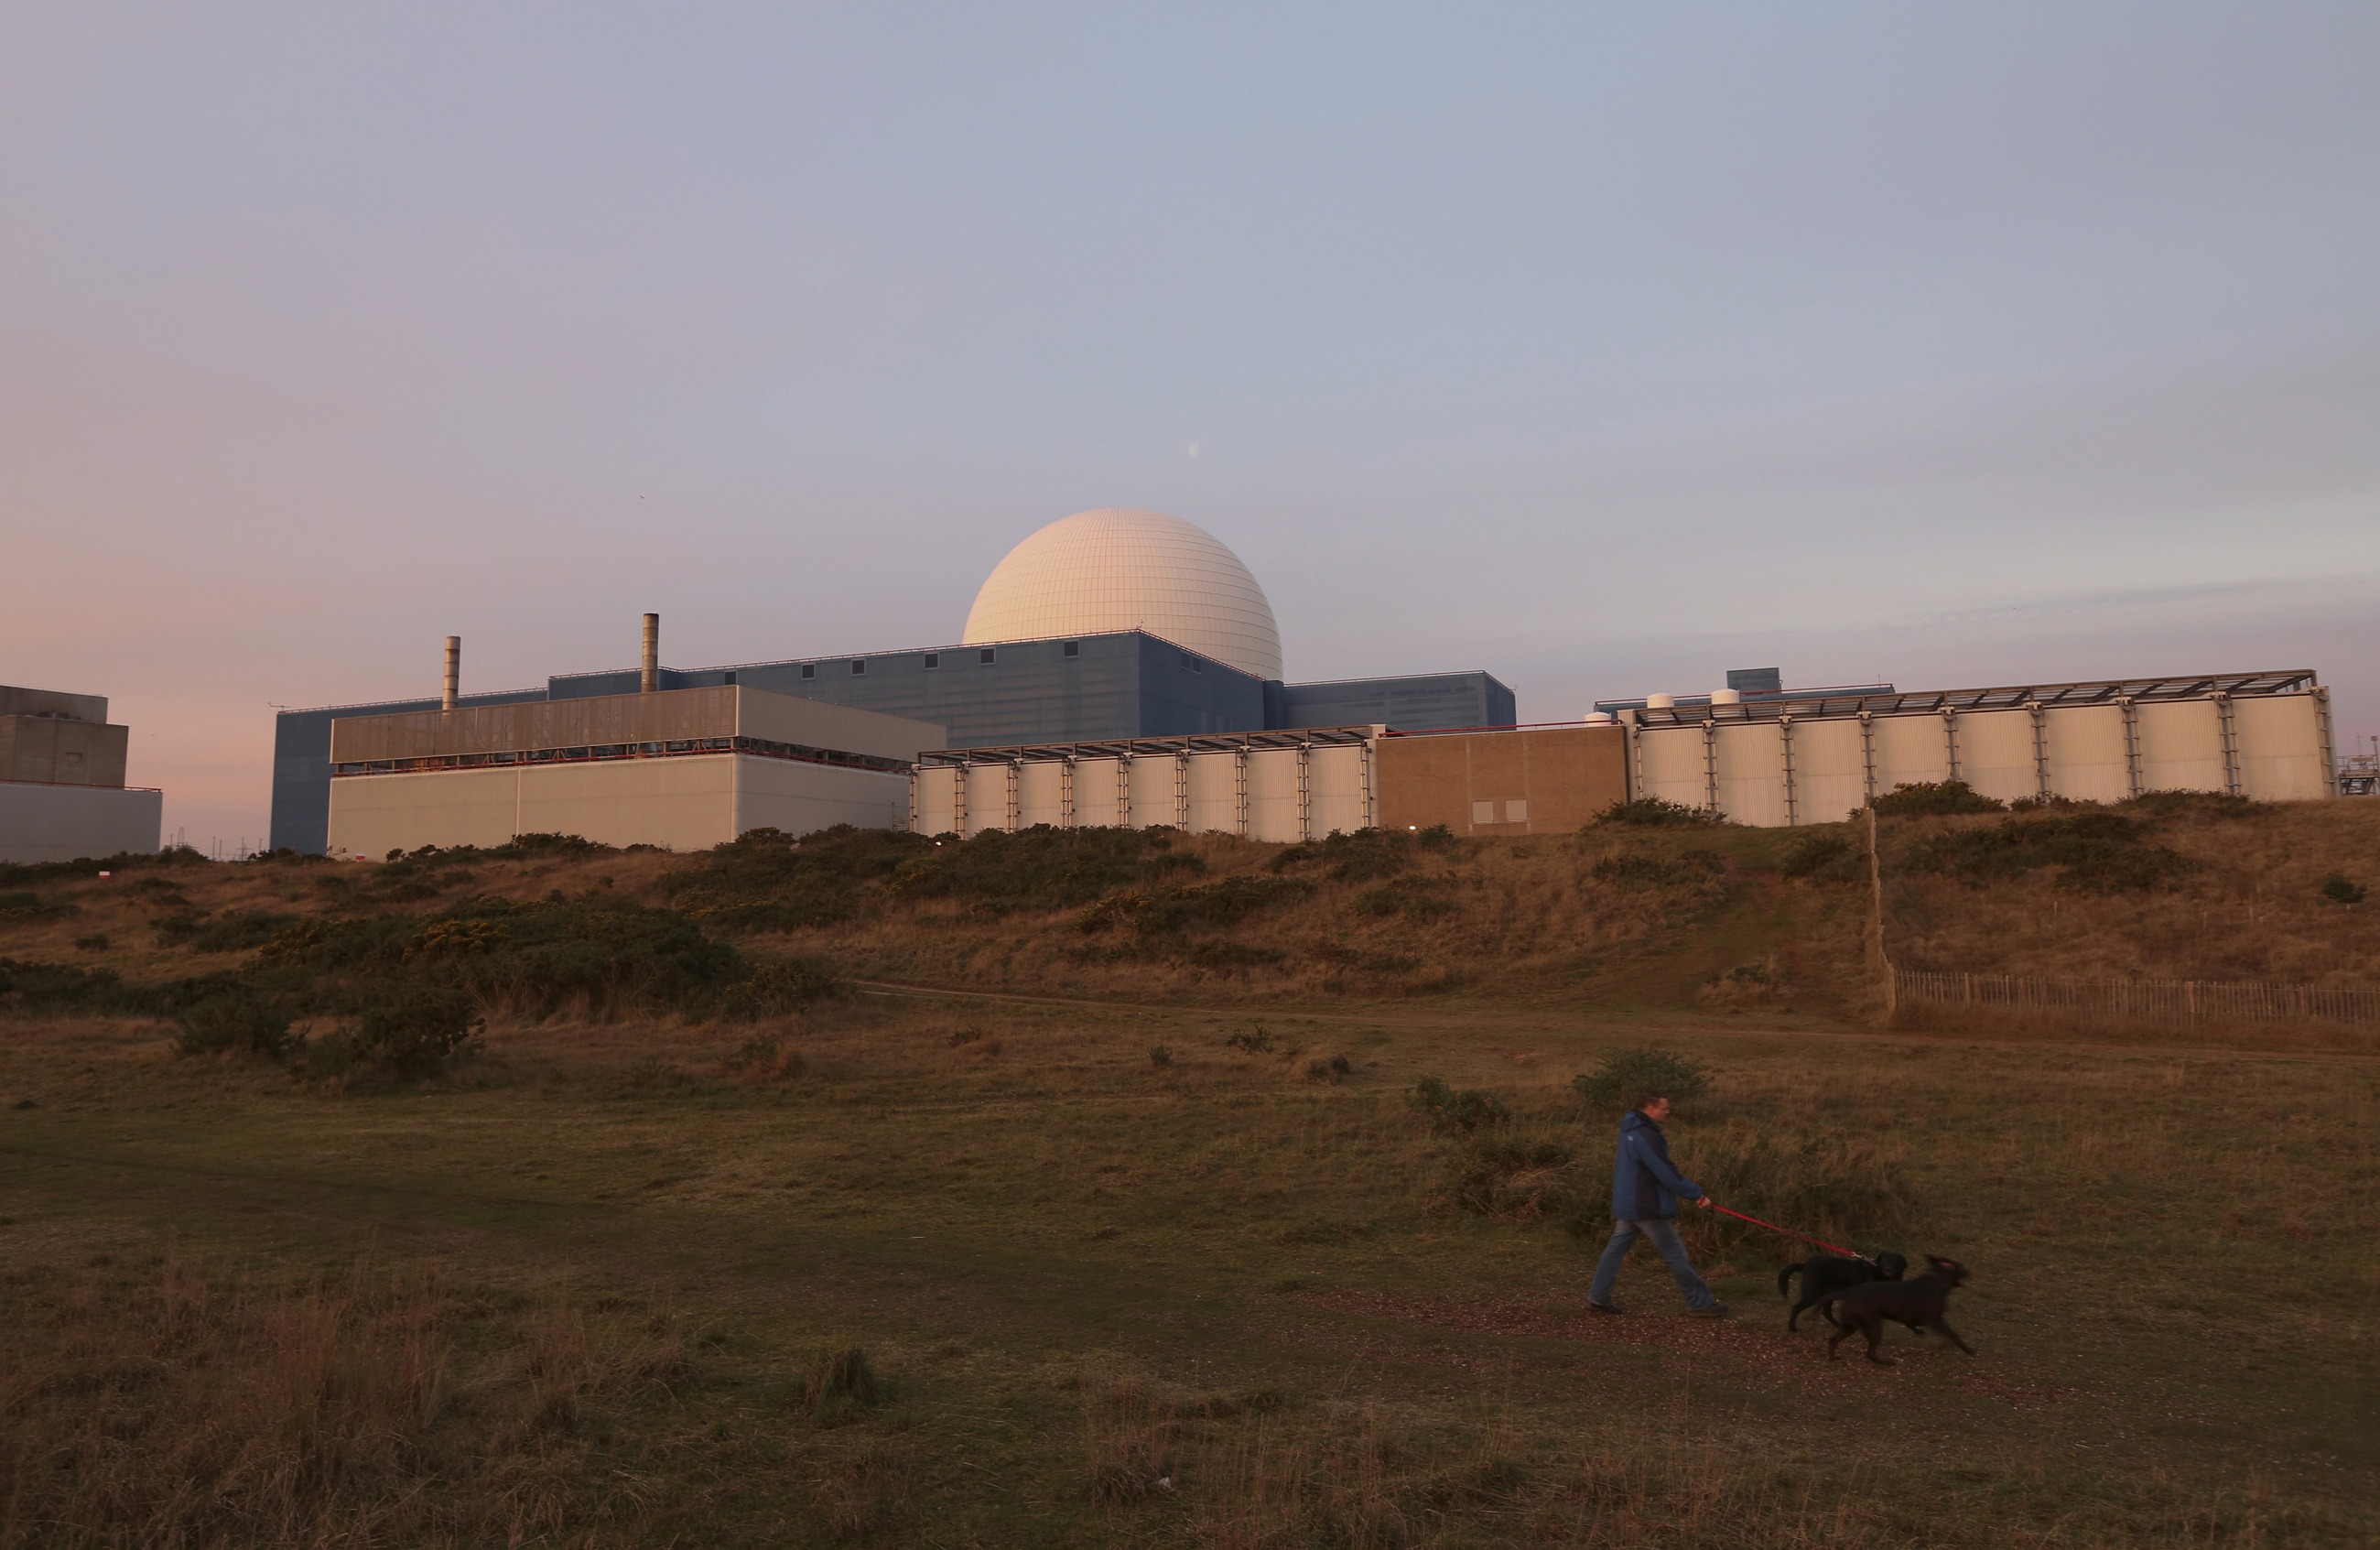 The Sizewell B nuclear power station, operated by Electricite de France SA (EDF), in Sizewell, UK.